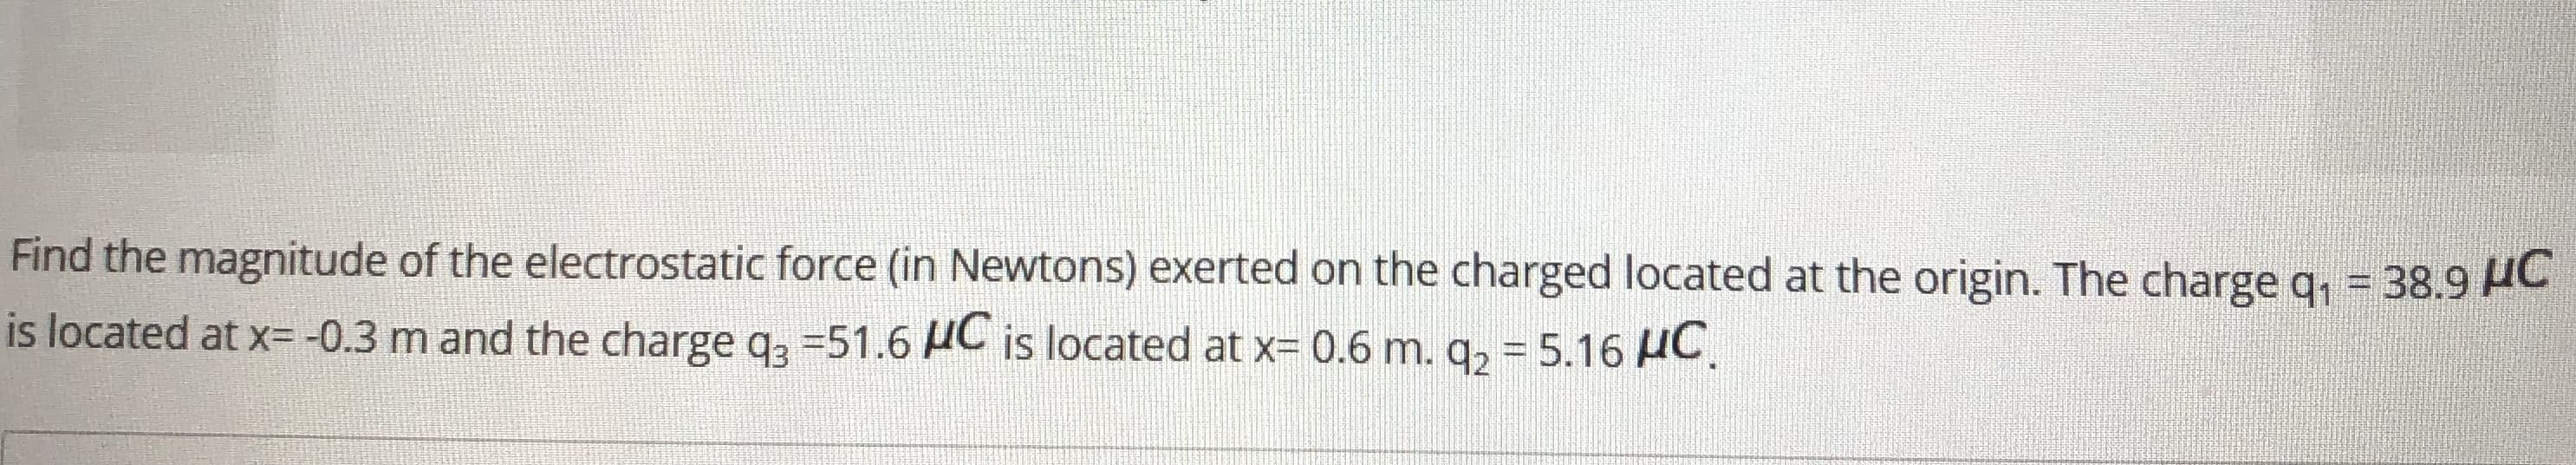 %3D
Find the magnitude of the electrostatic force (in Newtons) exerted on the charged located at the origin. The charge q, = 38.9 AC
is located at x= -0.3 m and the charge q3 =51.6 HC is located at x= 0.6 m. q2 = 5.16 AC.
